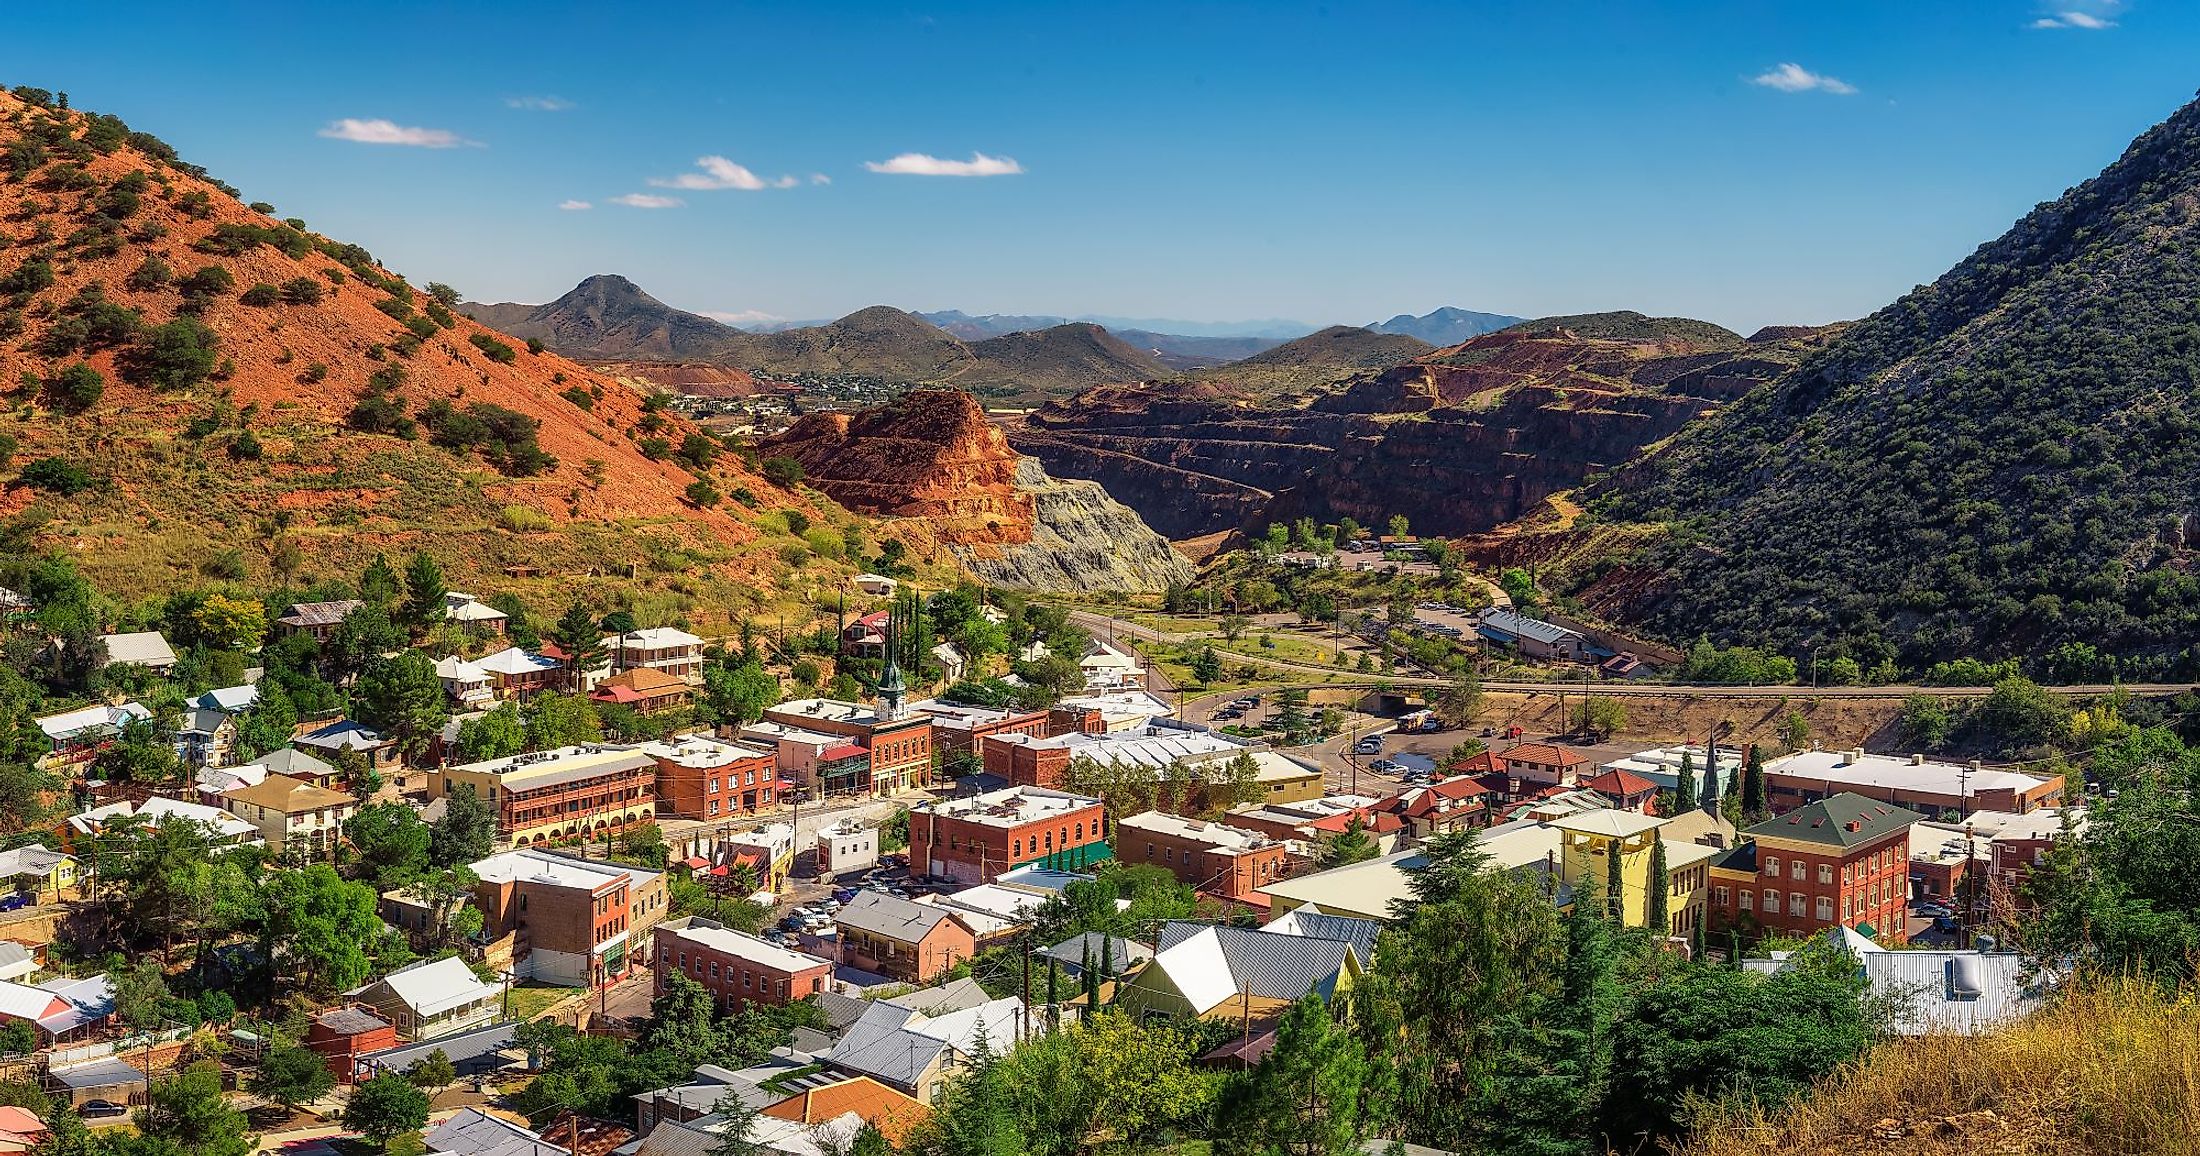 Panorama of Bisbee with the surrounding Mule Mountains in Arizona. 